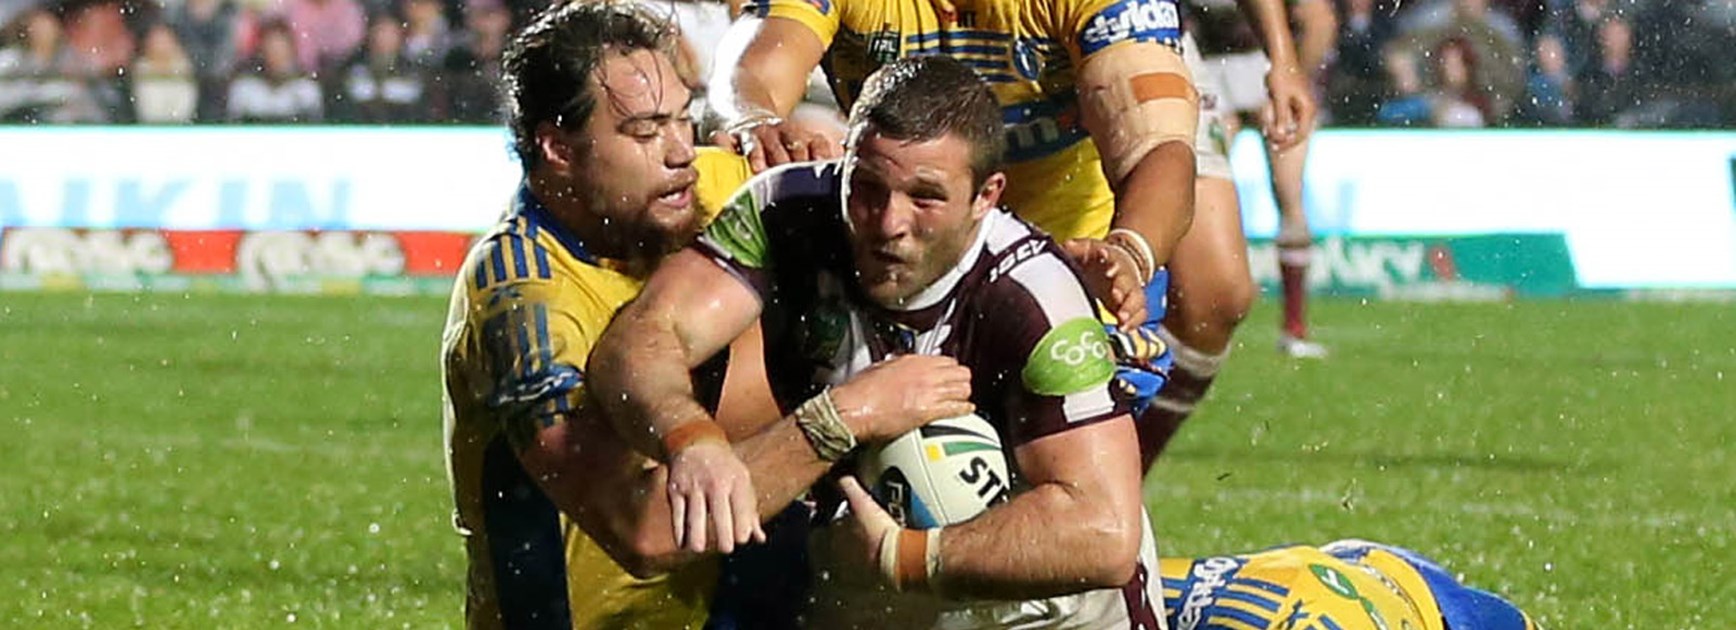 Sea Eagles lock Blake Leary in action against the Eels.